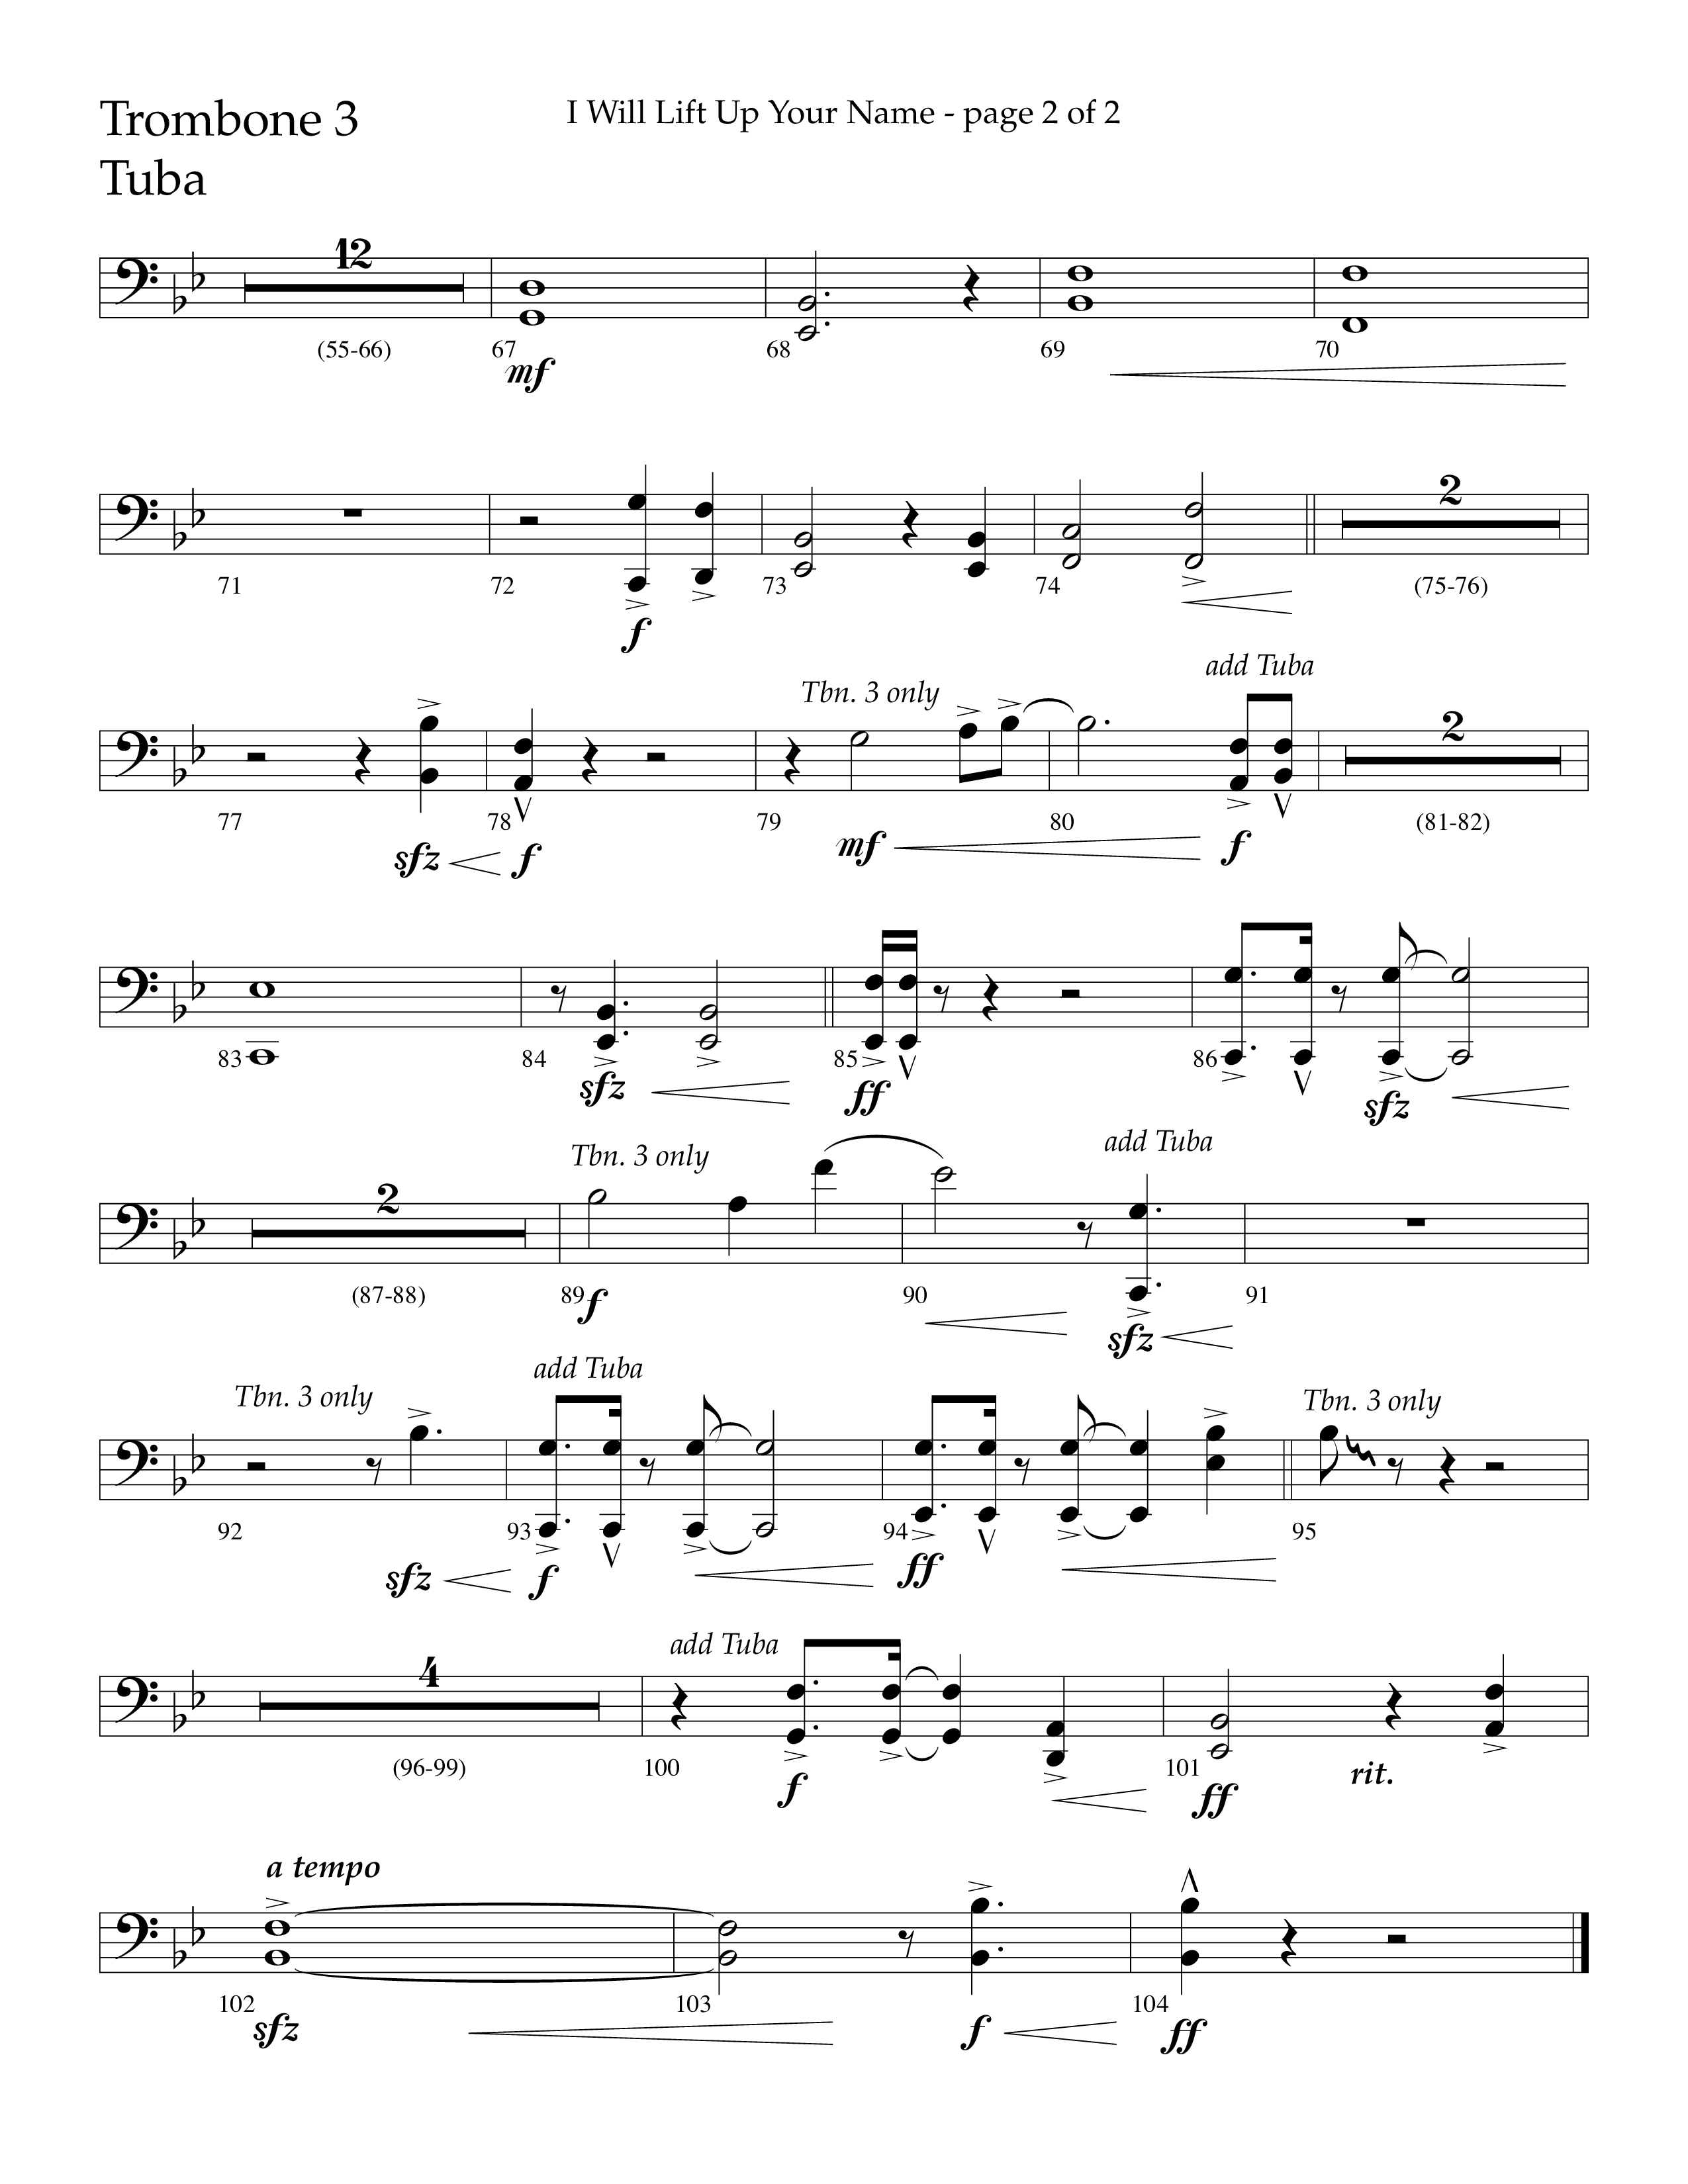 I Will Lift Up Your Name (Choral Anthem SATB) Trombone 3/Tuba (Lifeway Choral / Arr. John Bolin / Orch. Cliff Duren)